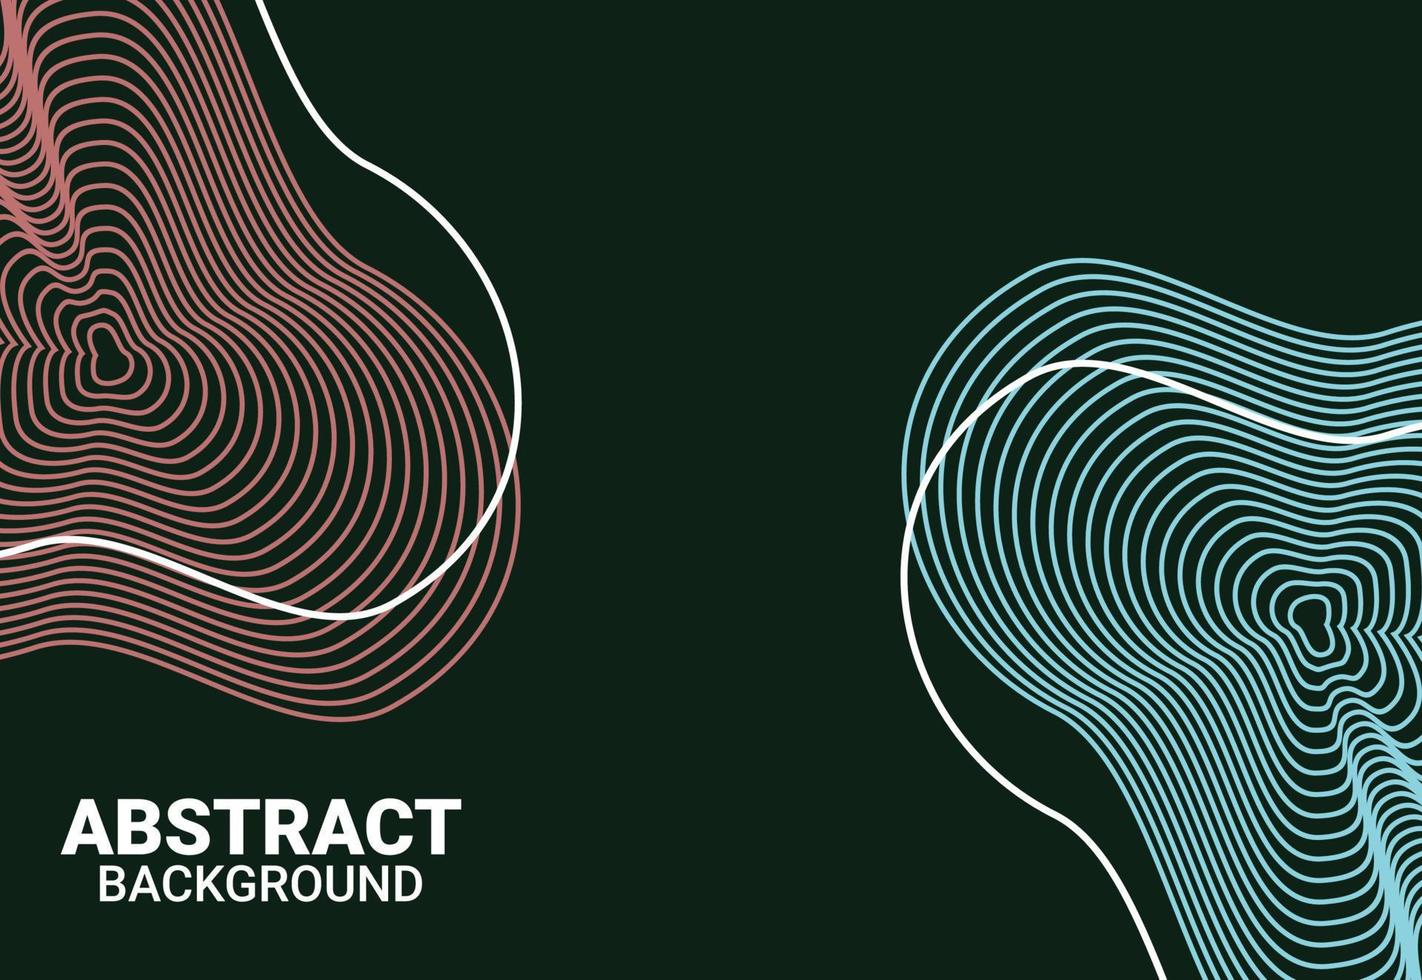 abstract background with curved lines and circles vector